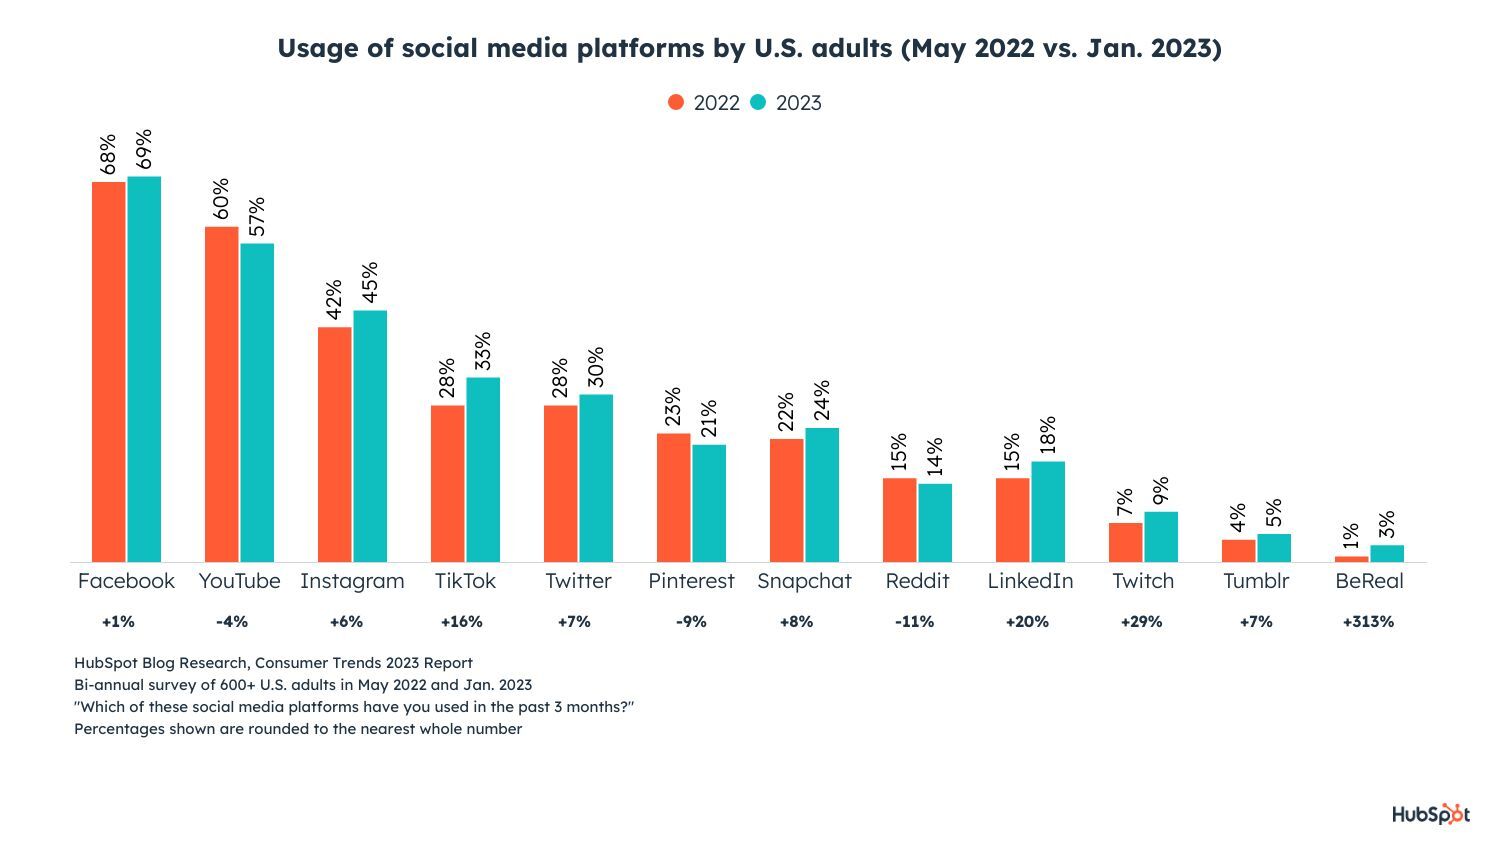 usage of social media platforms by u.s. adults in 2023